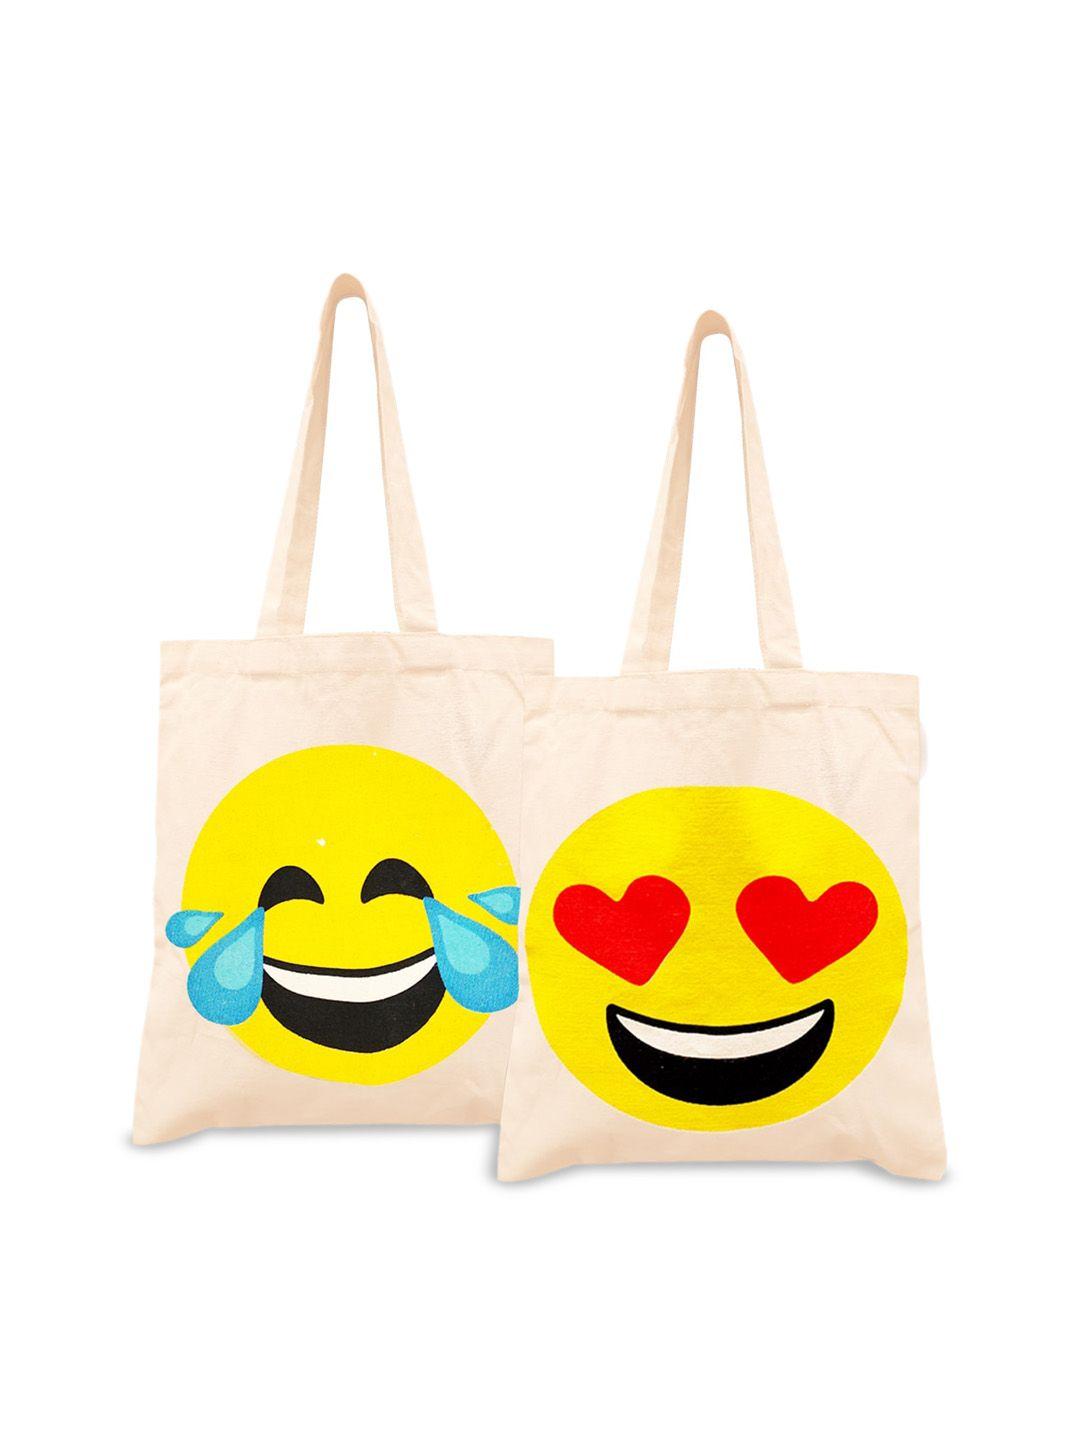 earthbags pack of 2 graphic printed shopper tote bag